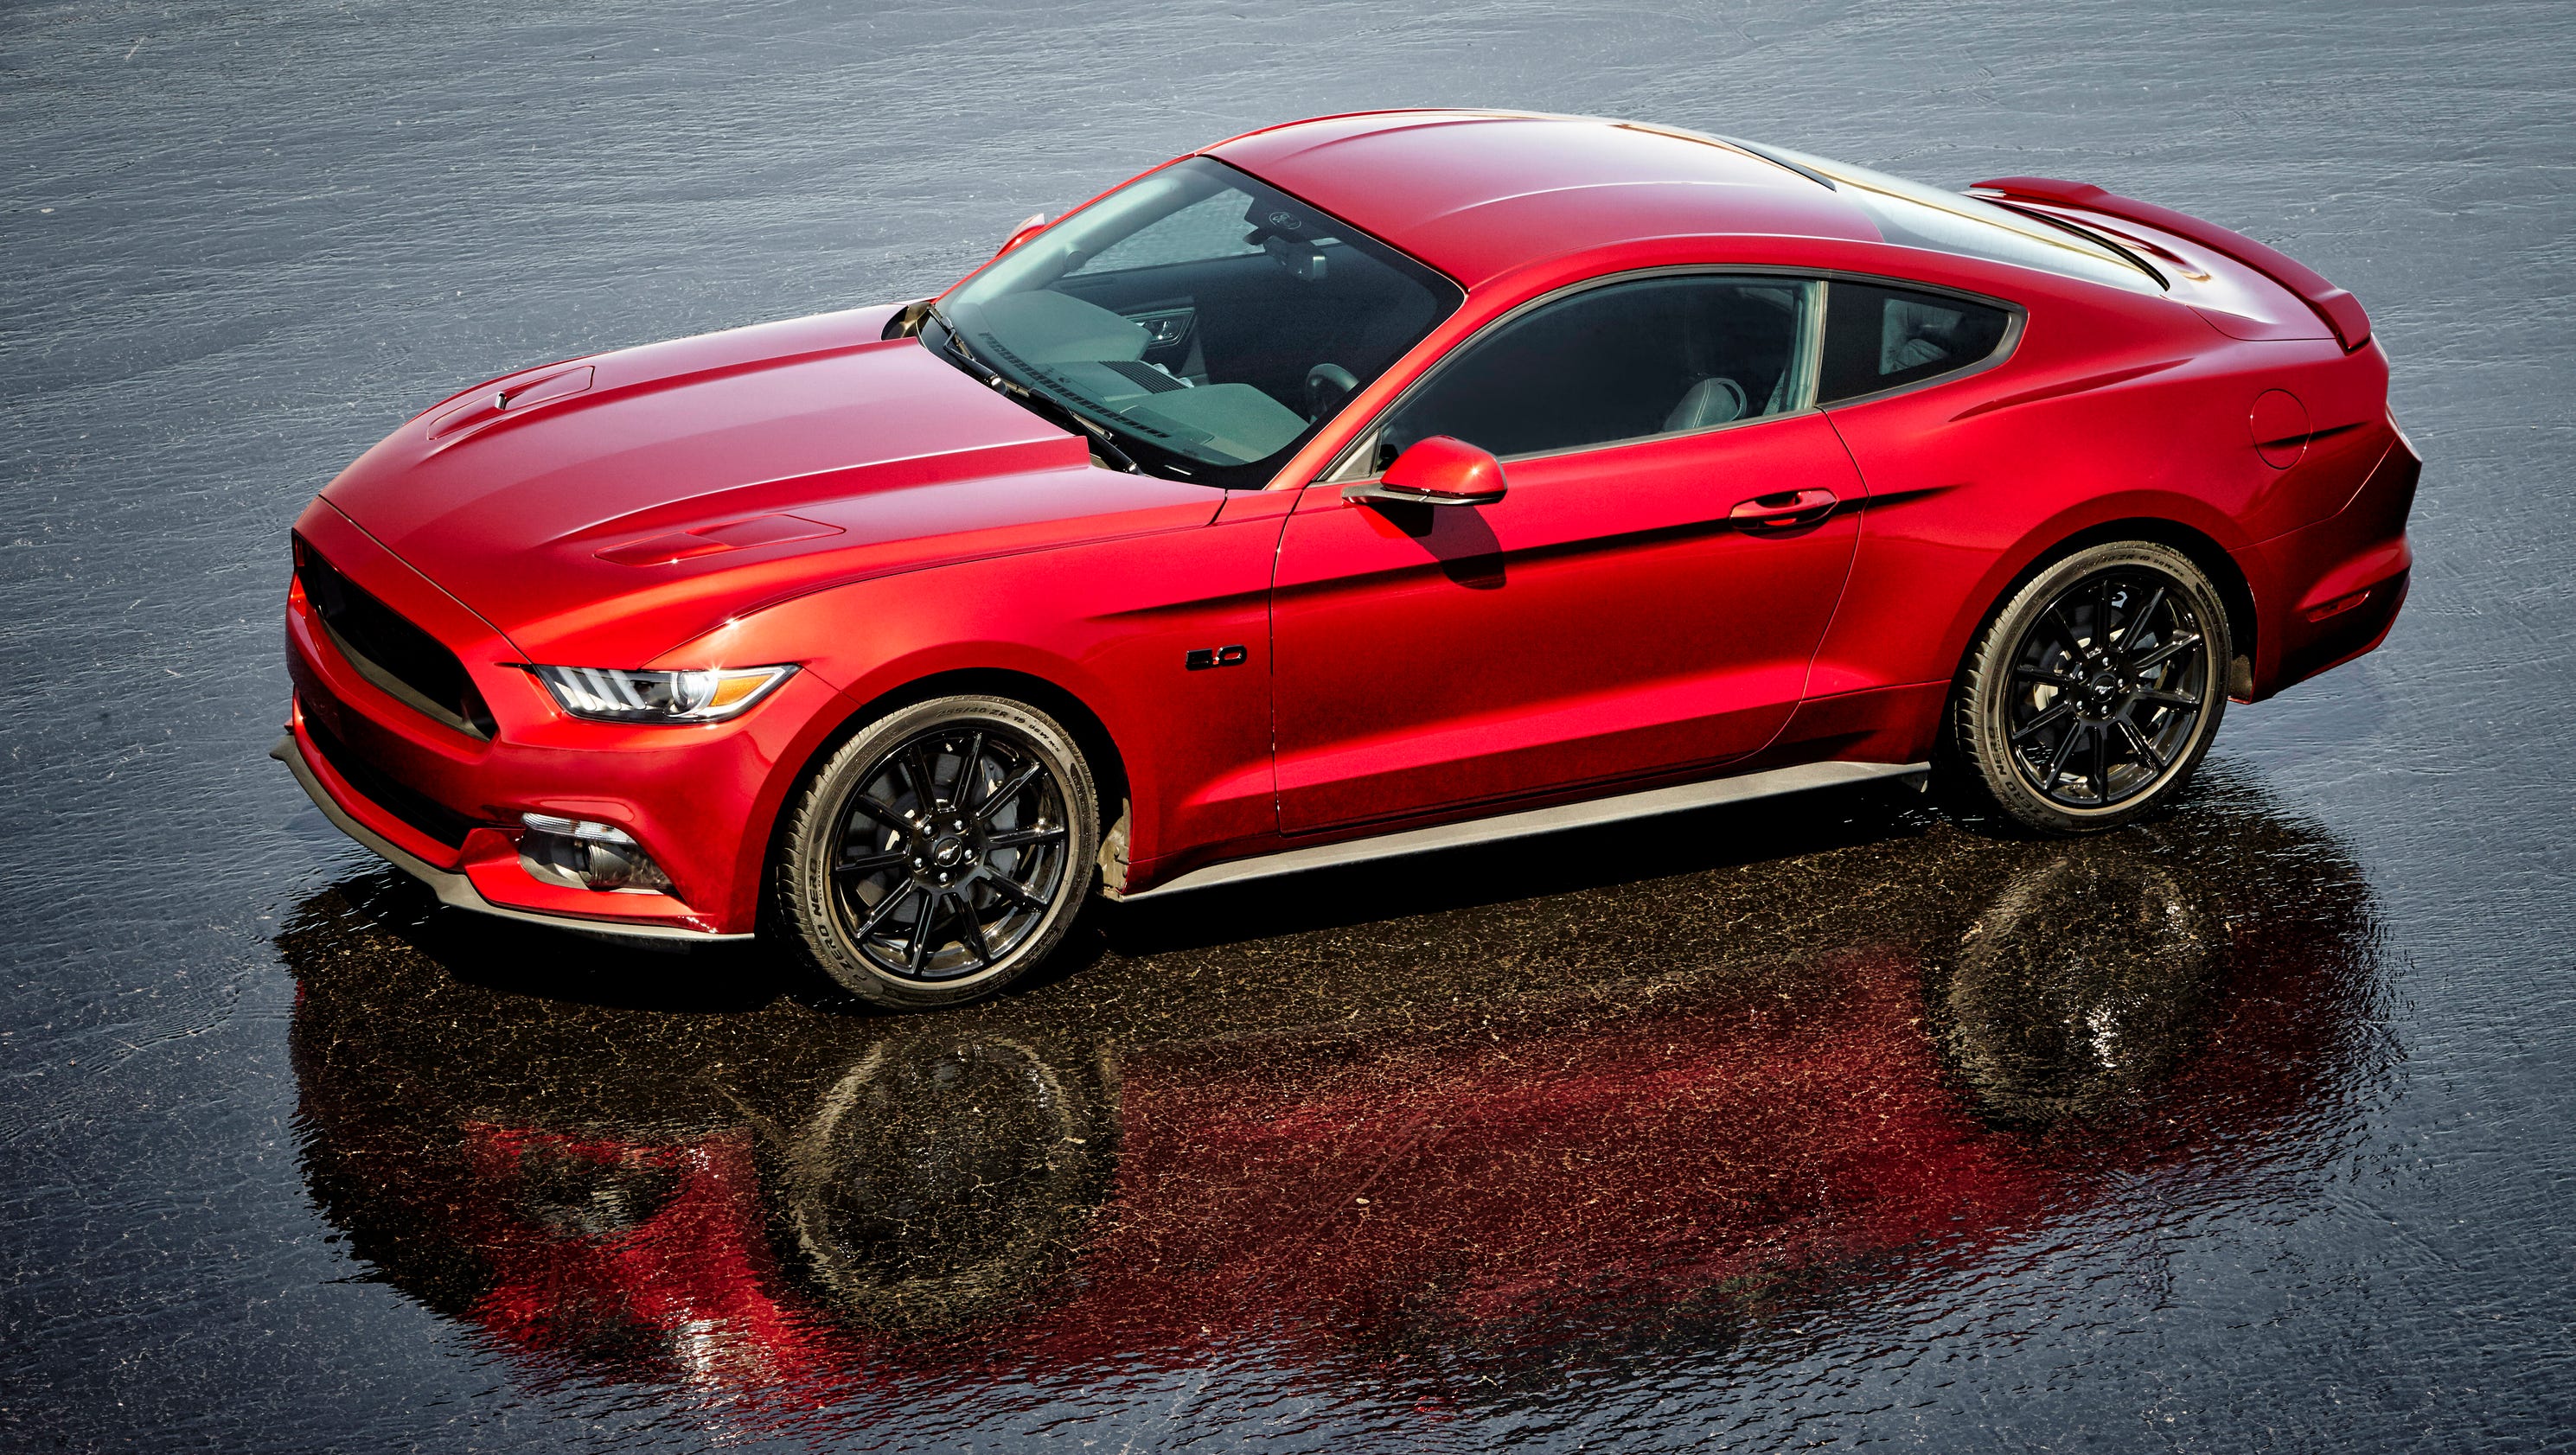 Images Of The Ford Mustang All Year Models